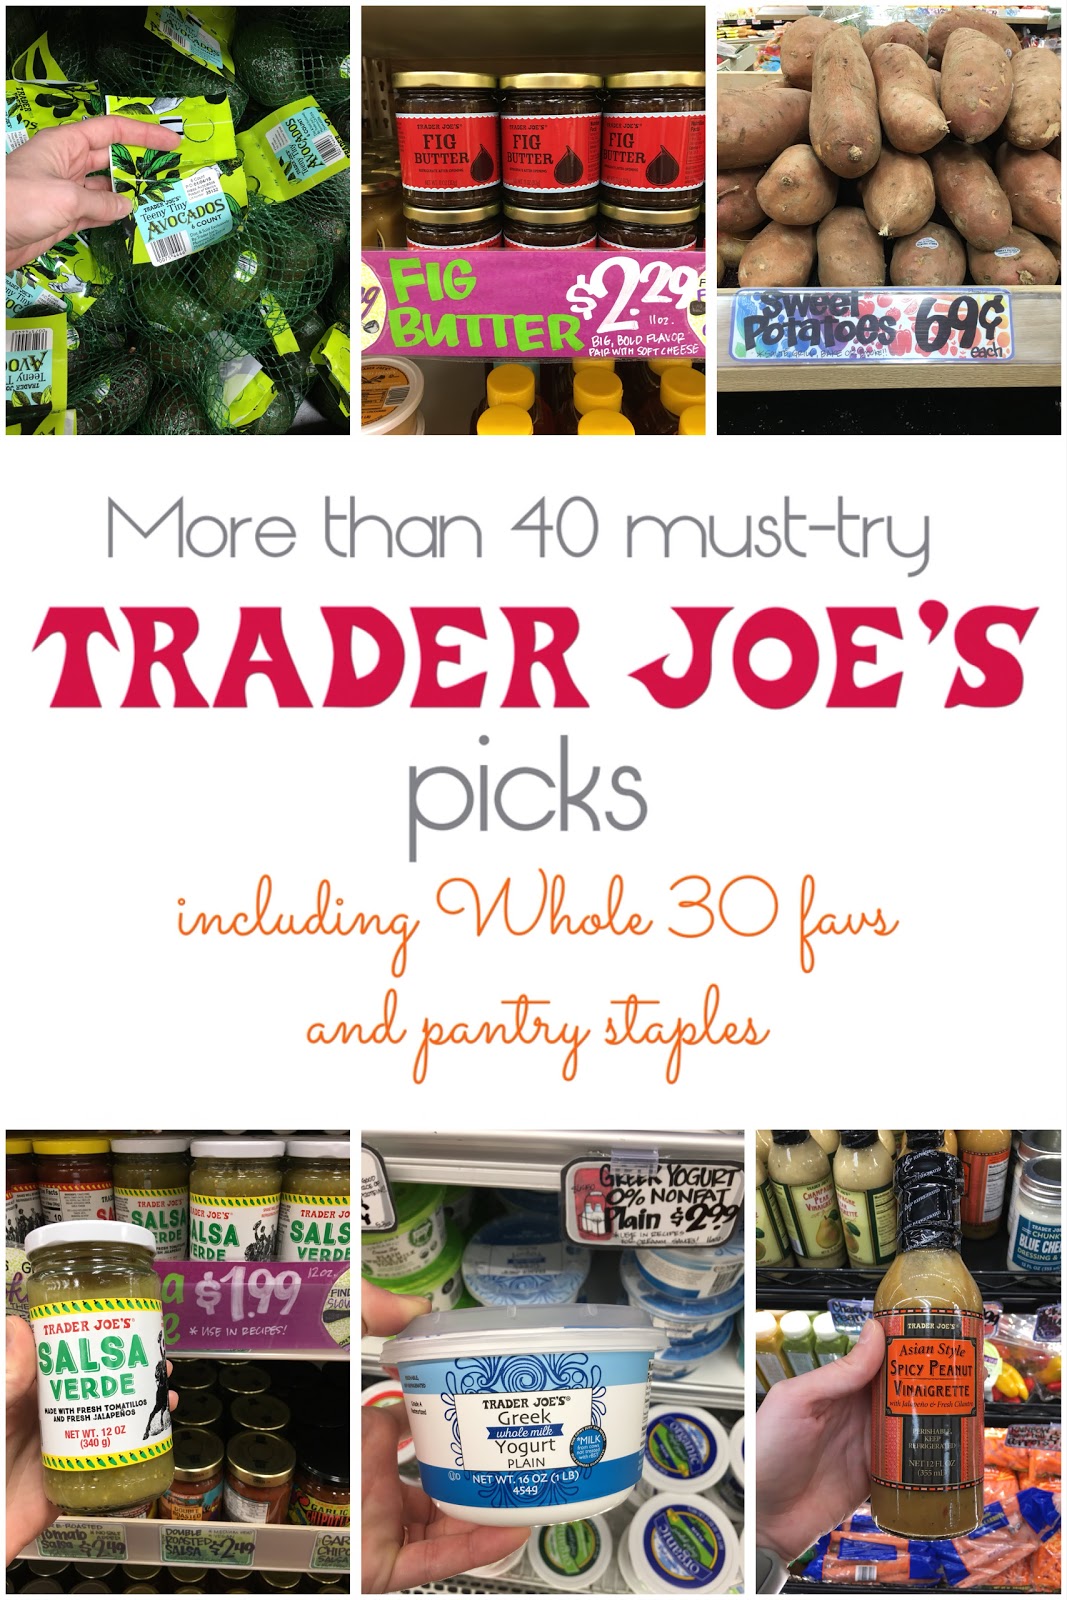 The Best Whole30 Trader Joe's Shopping List - The Clean Eating Couple